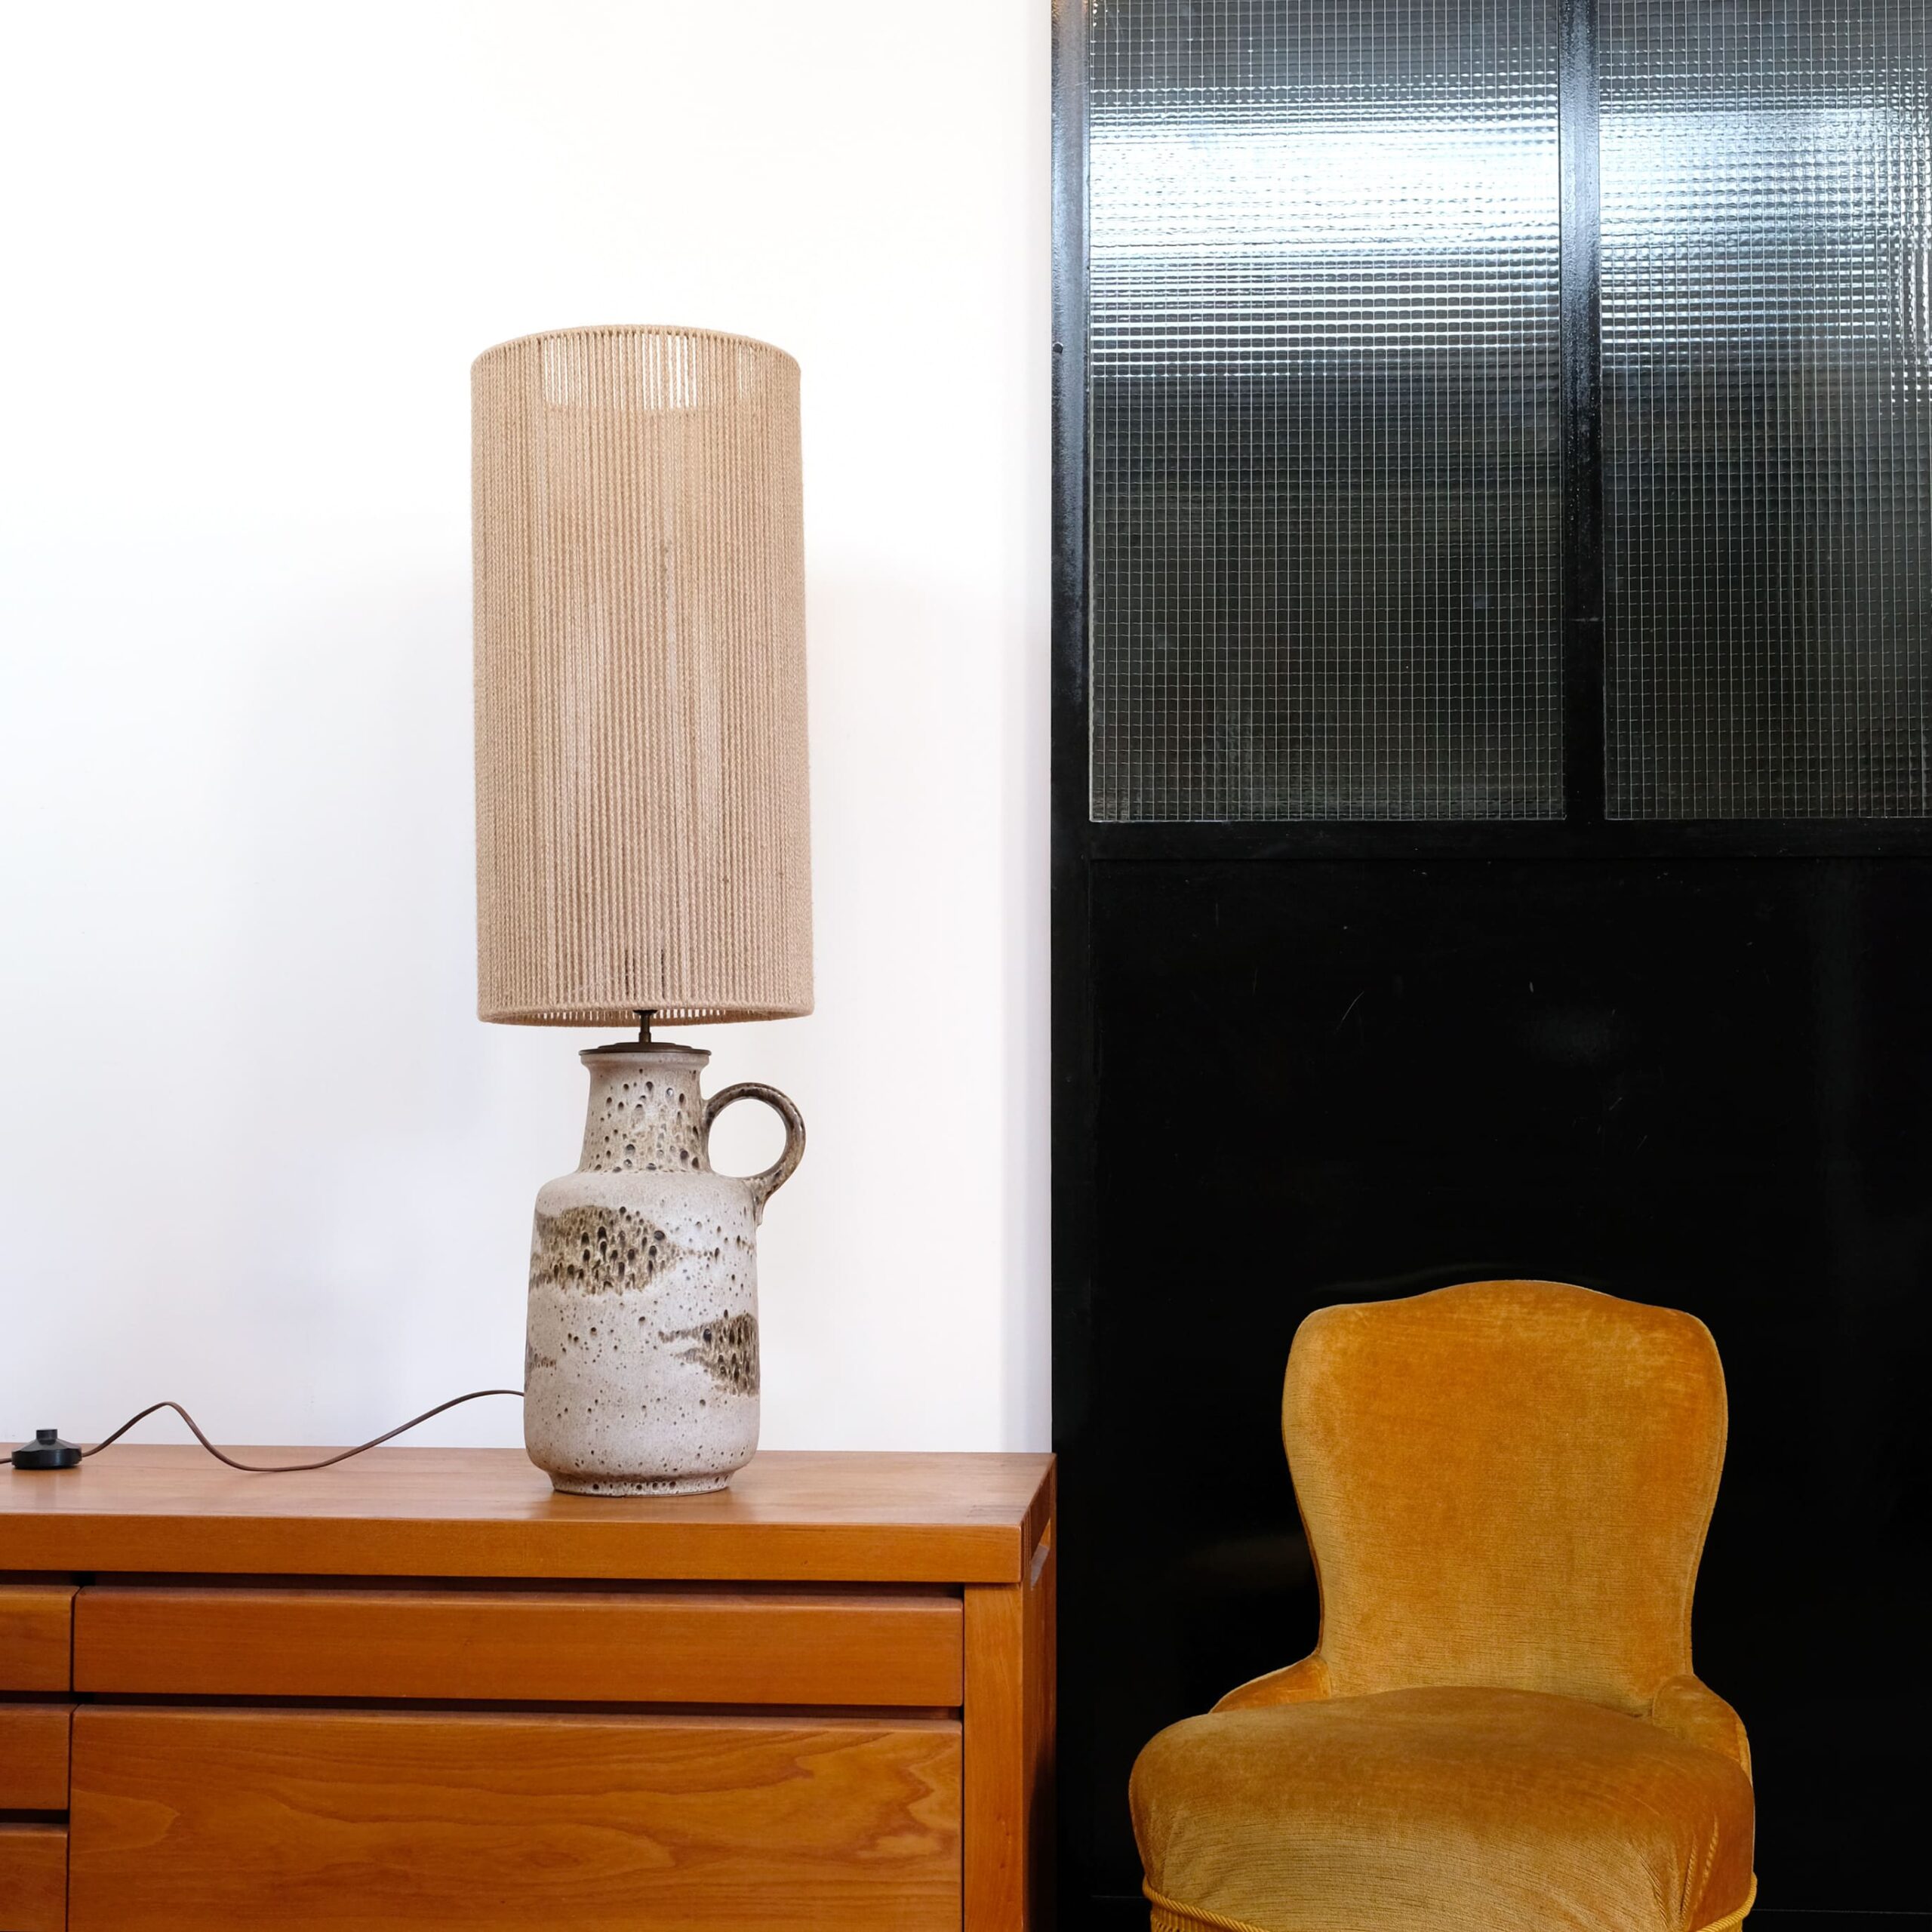 Large ceramic table lamp with its rope shade.